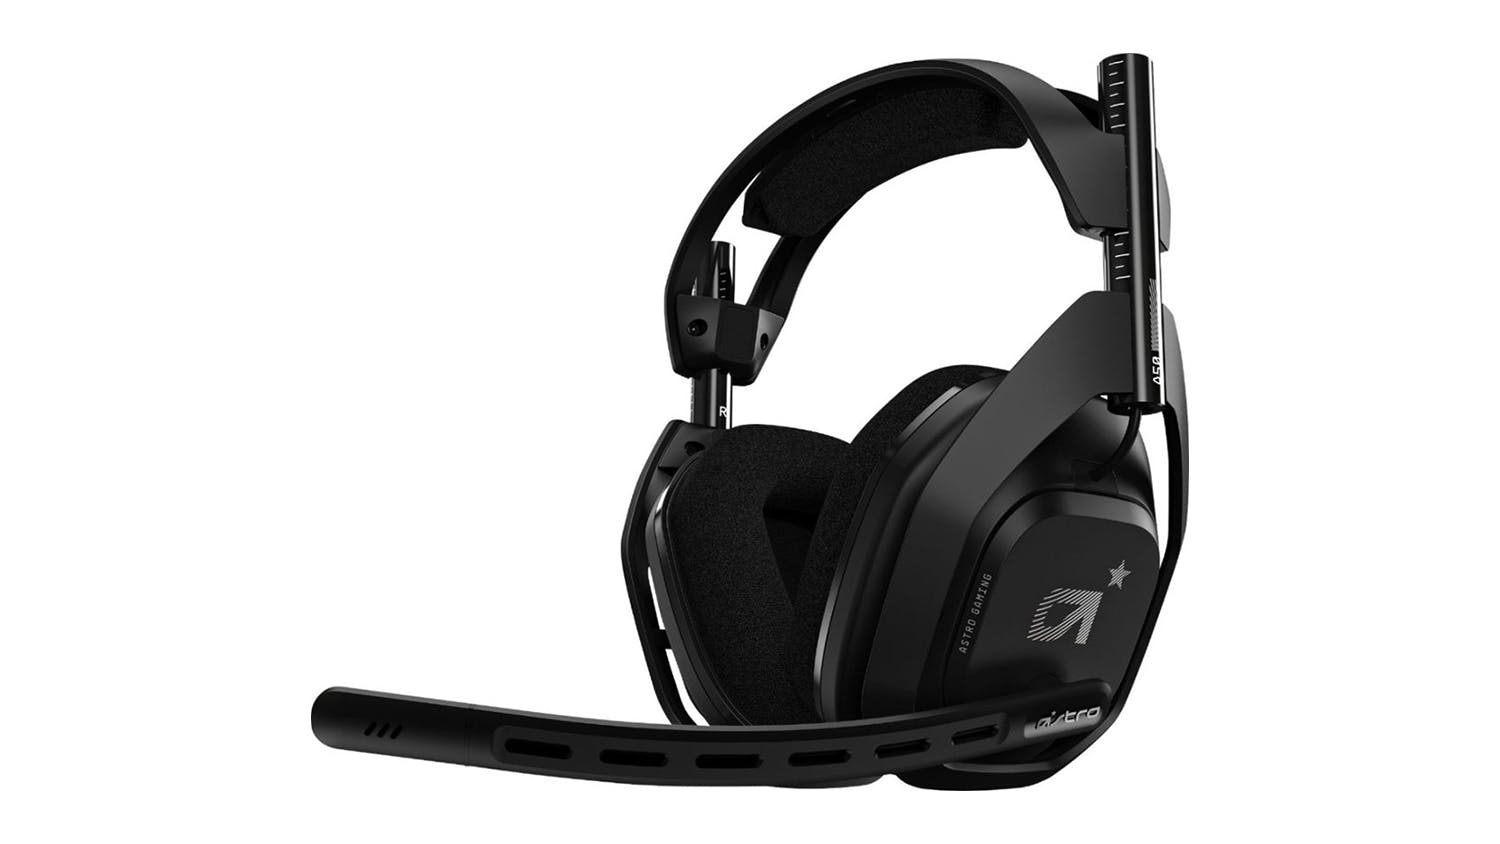 Astro A50 Gaming Headset for PS4 - Black Grey